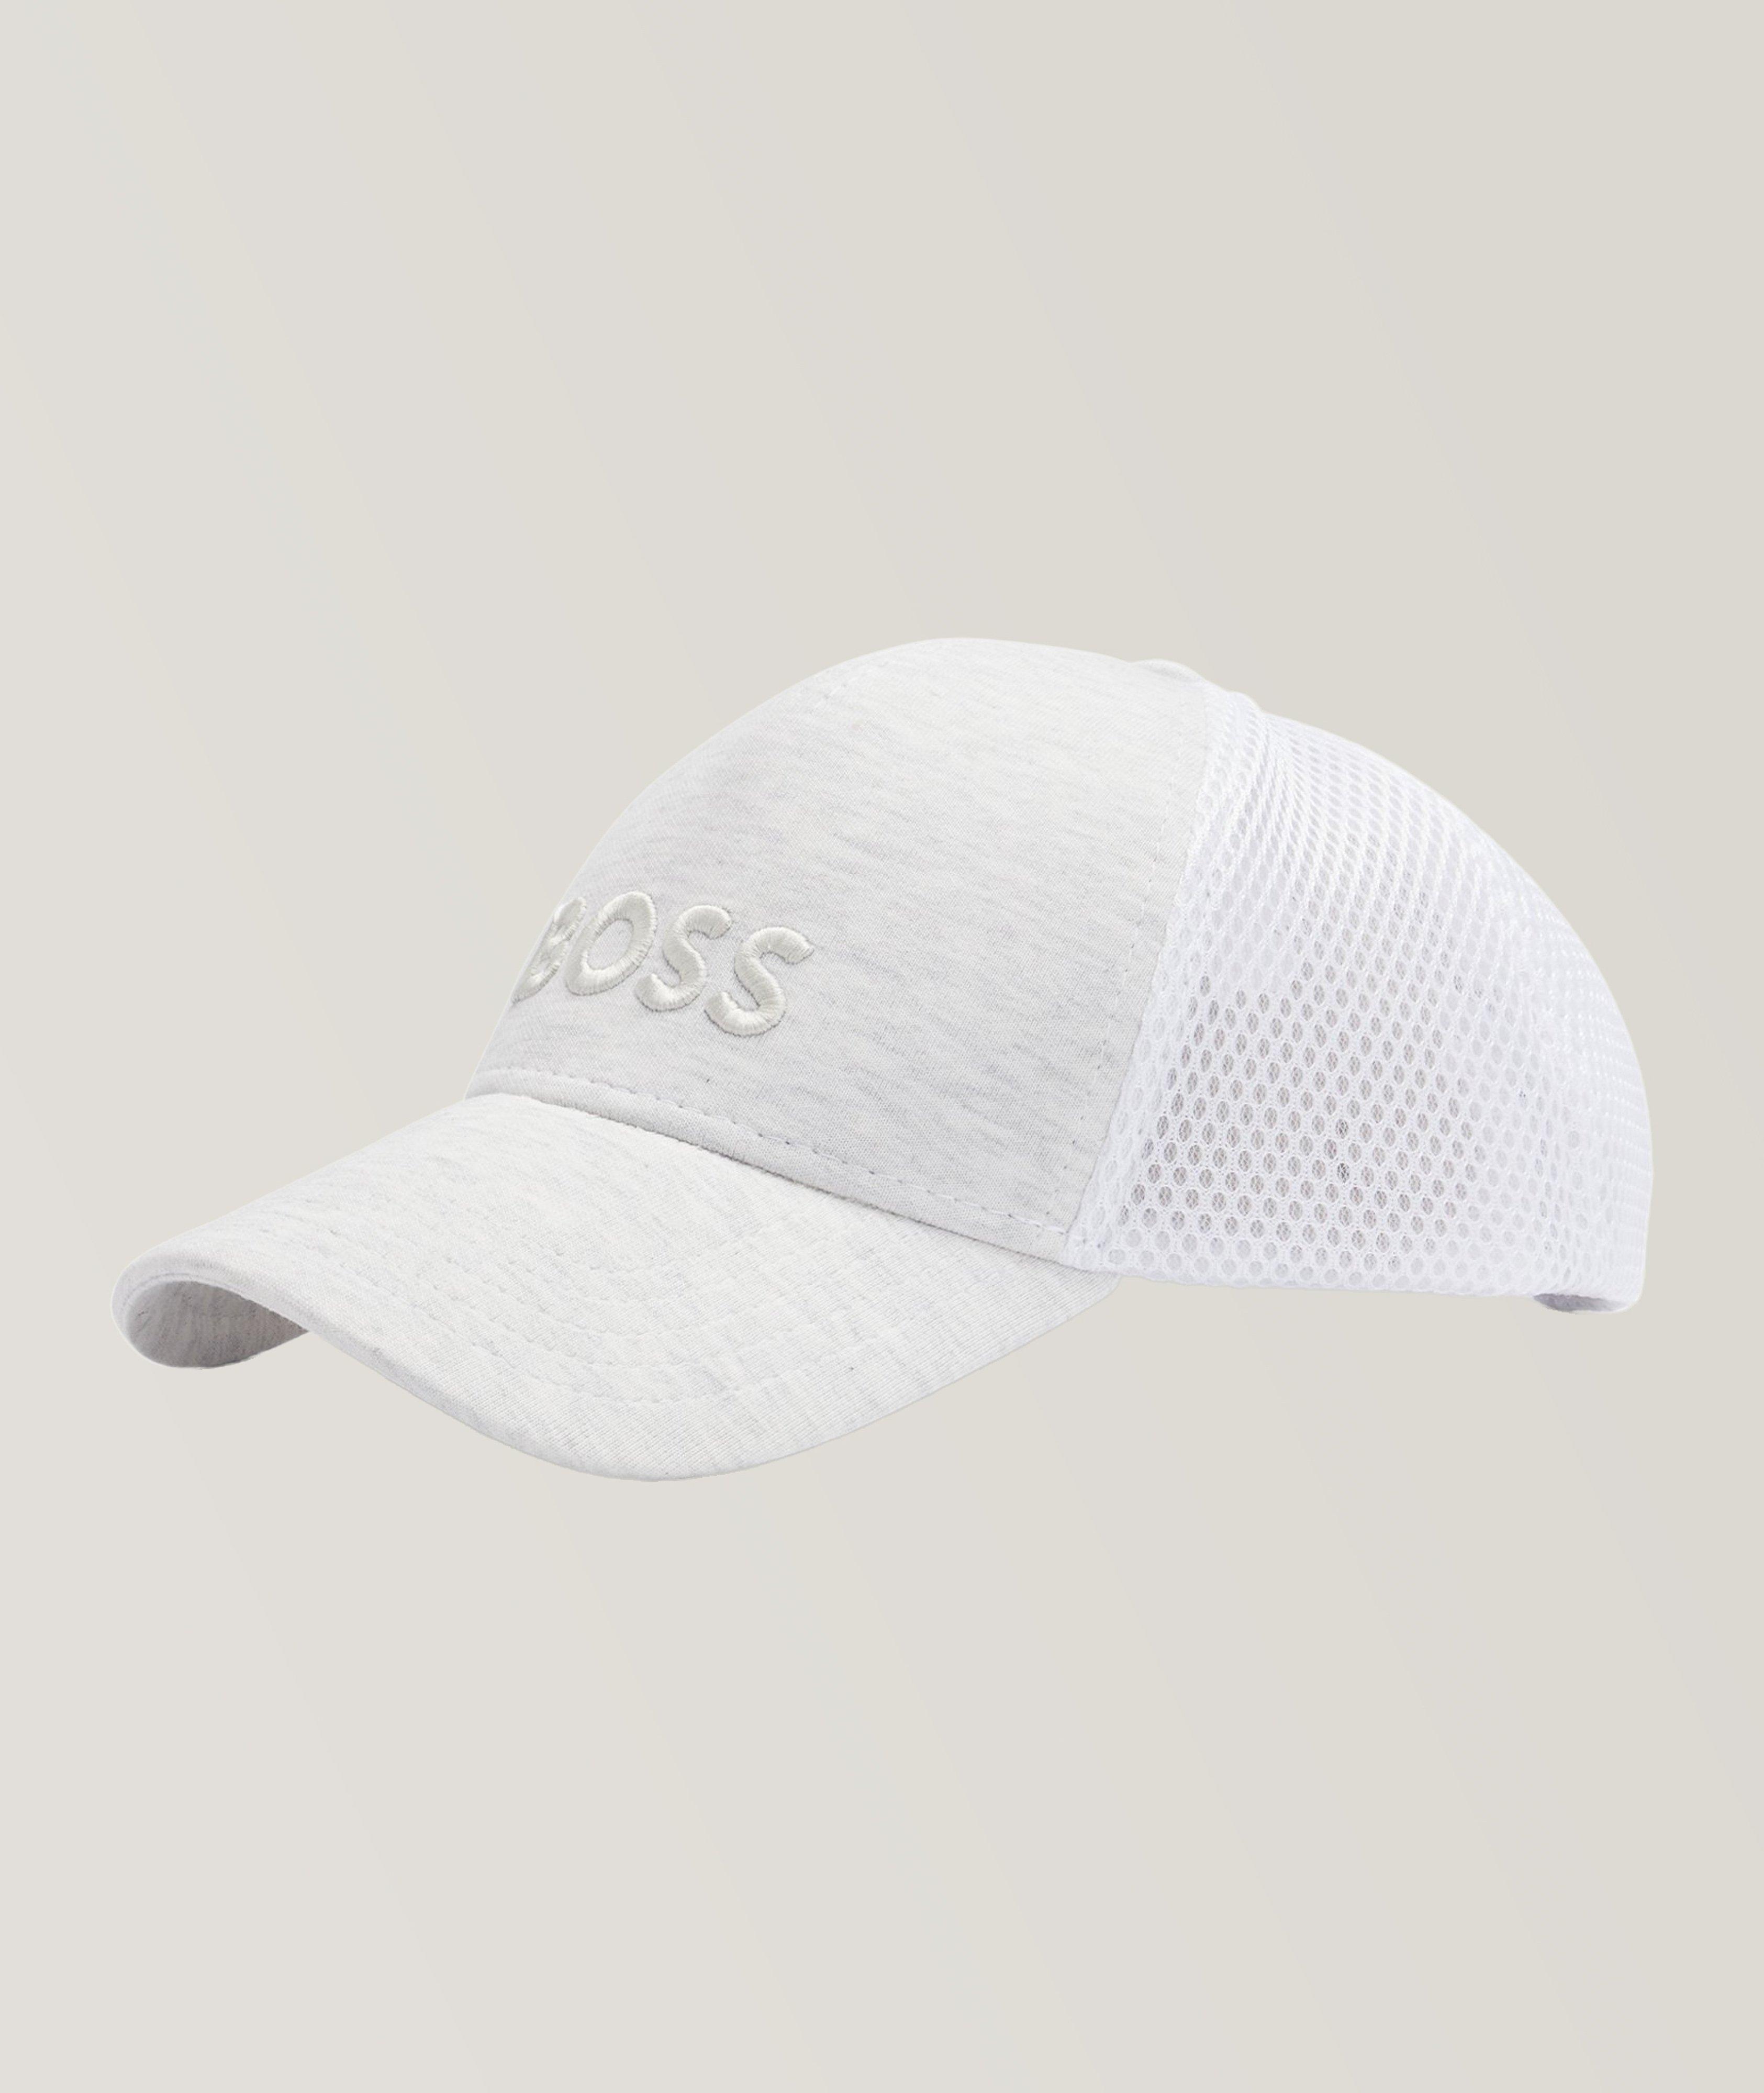 Logo Embroidered Mixed Material Cap image 2